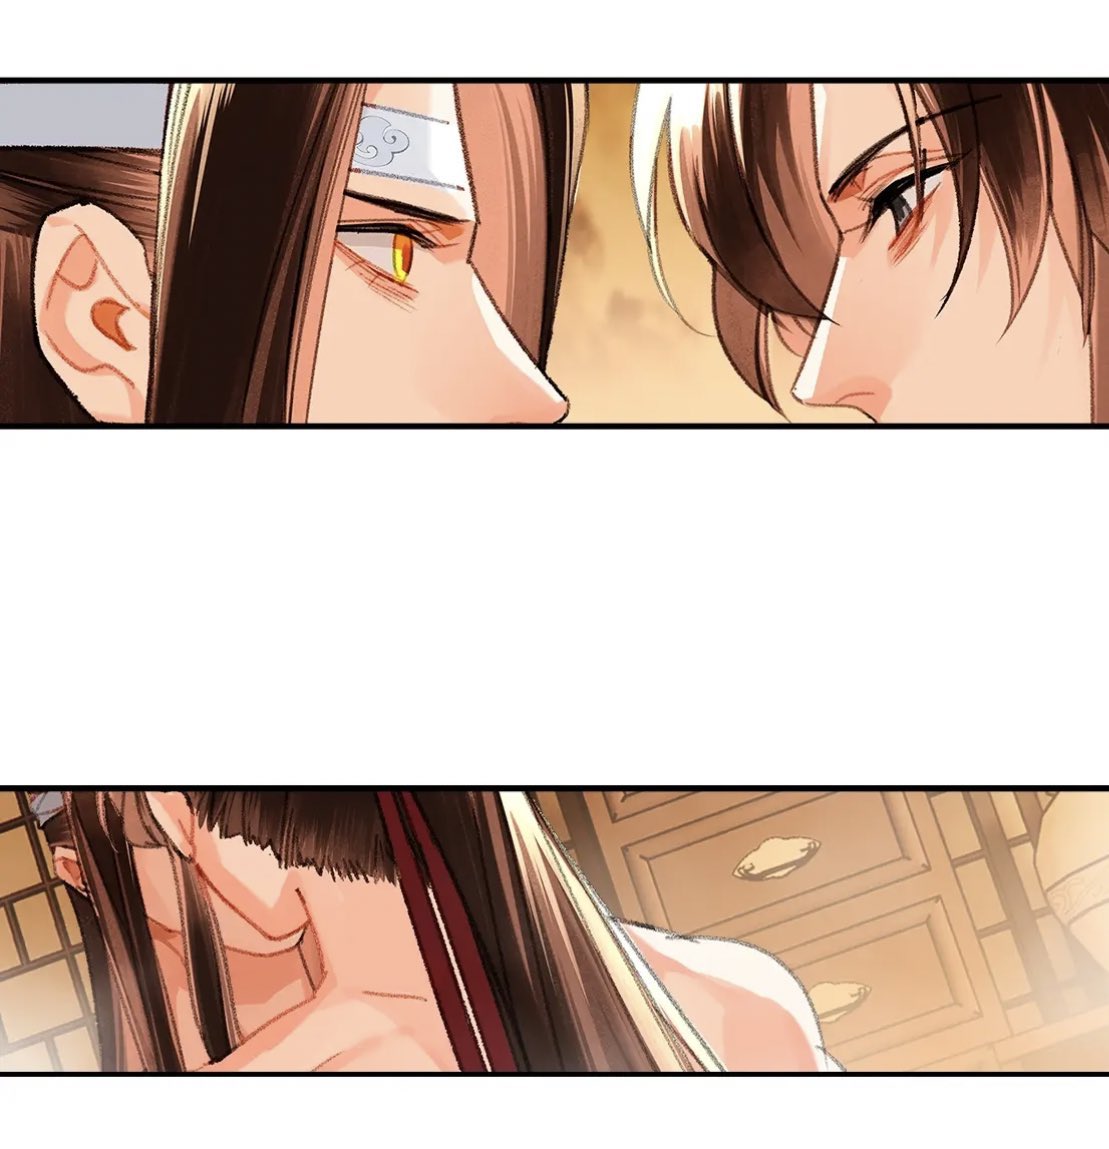 this manhua update was INSANE. for the mdzs nation to finally get a visual adaptation of the bath tub scene from novel to manhua… the team behind this are doing the most 🙌🏼 